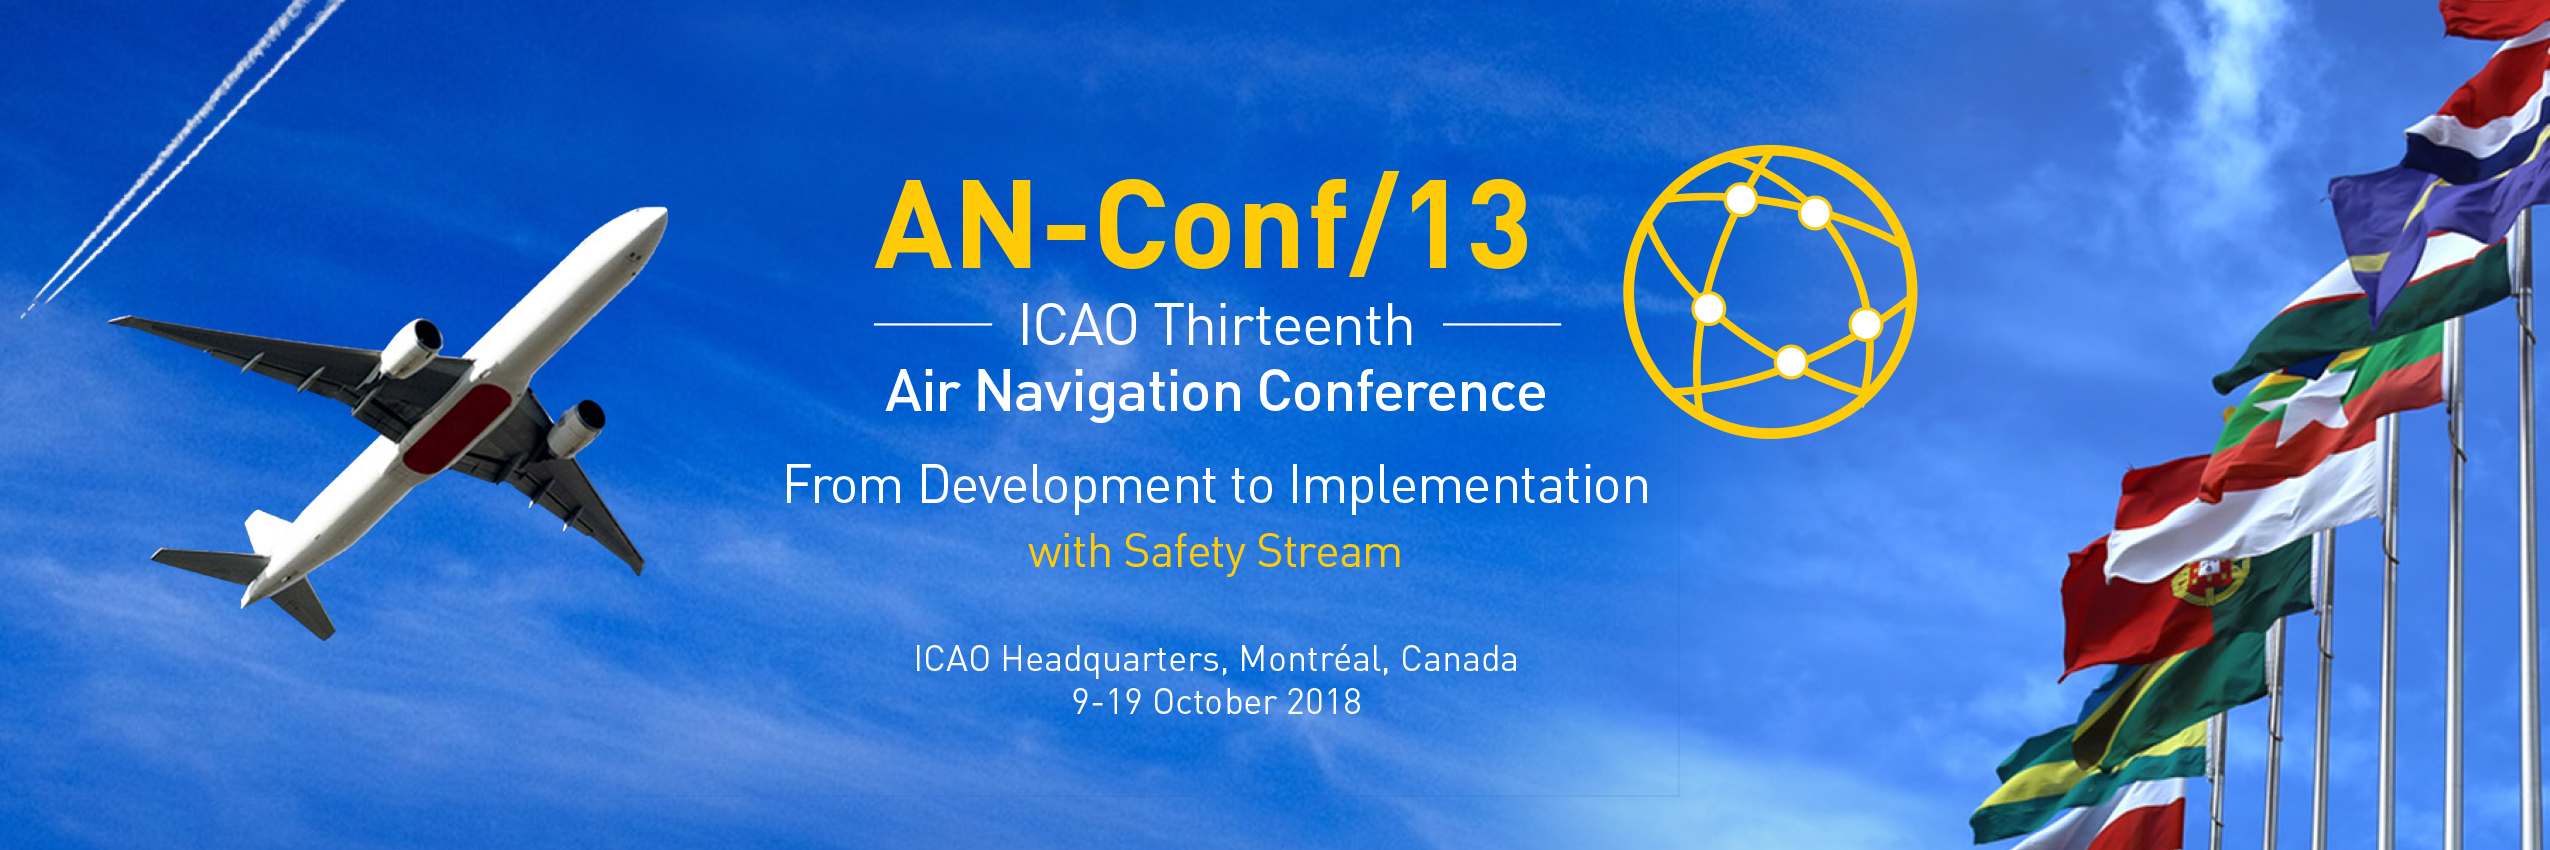 EDA promotes civil-military collaboration in the 13th ICAO Air Navigation Conference